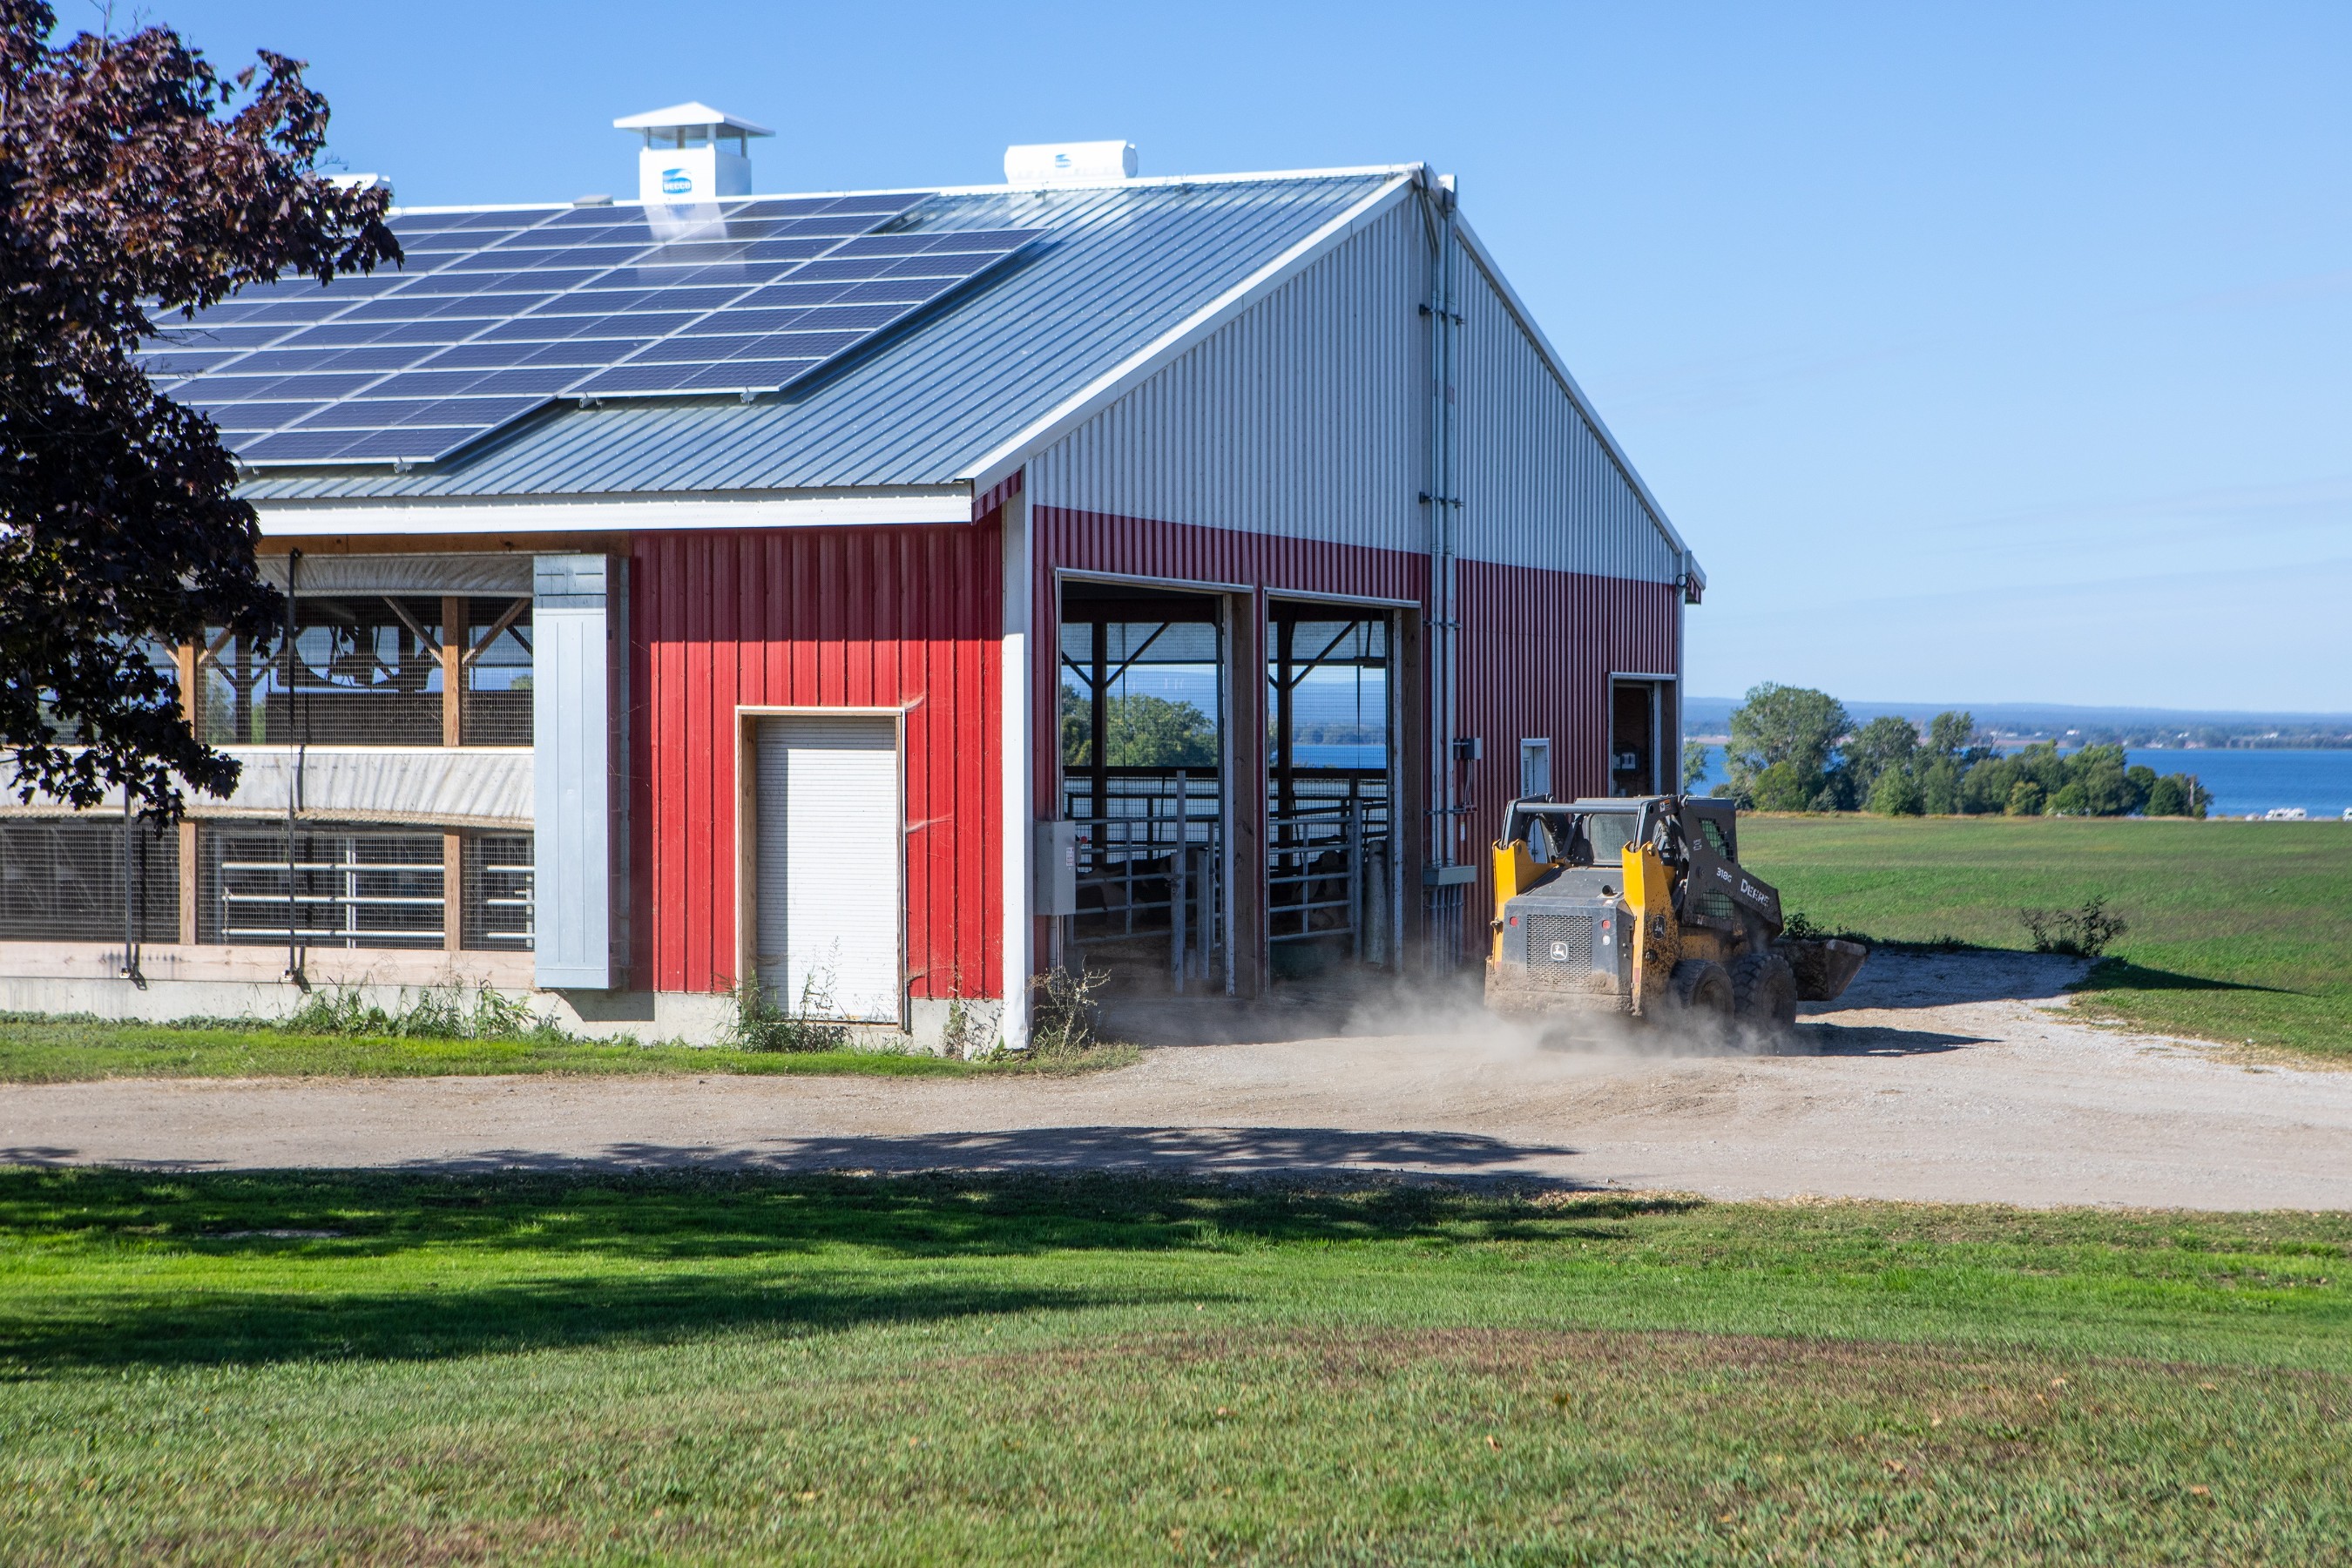 Sunset Lake Farm in Alburgh, VT is participating in Ben & Jerry’s Project Mootopia. The farm is reducing its energy costs and carbon footprint by using solar panels on the barn.  Photo: Ben & Jerry’s